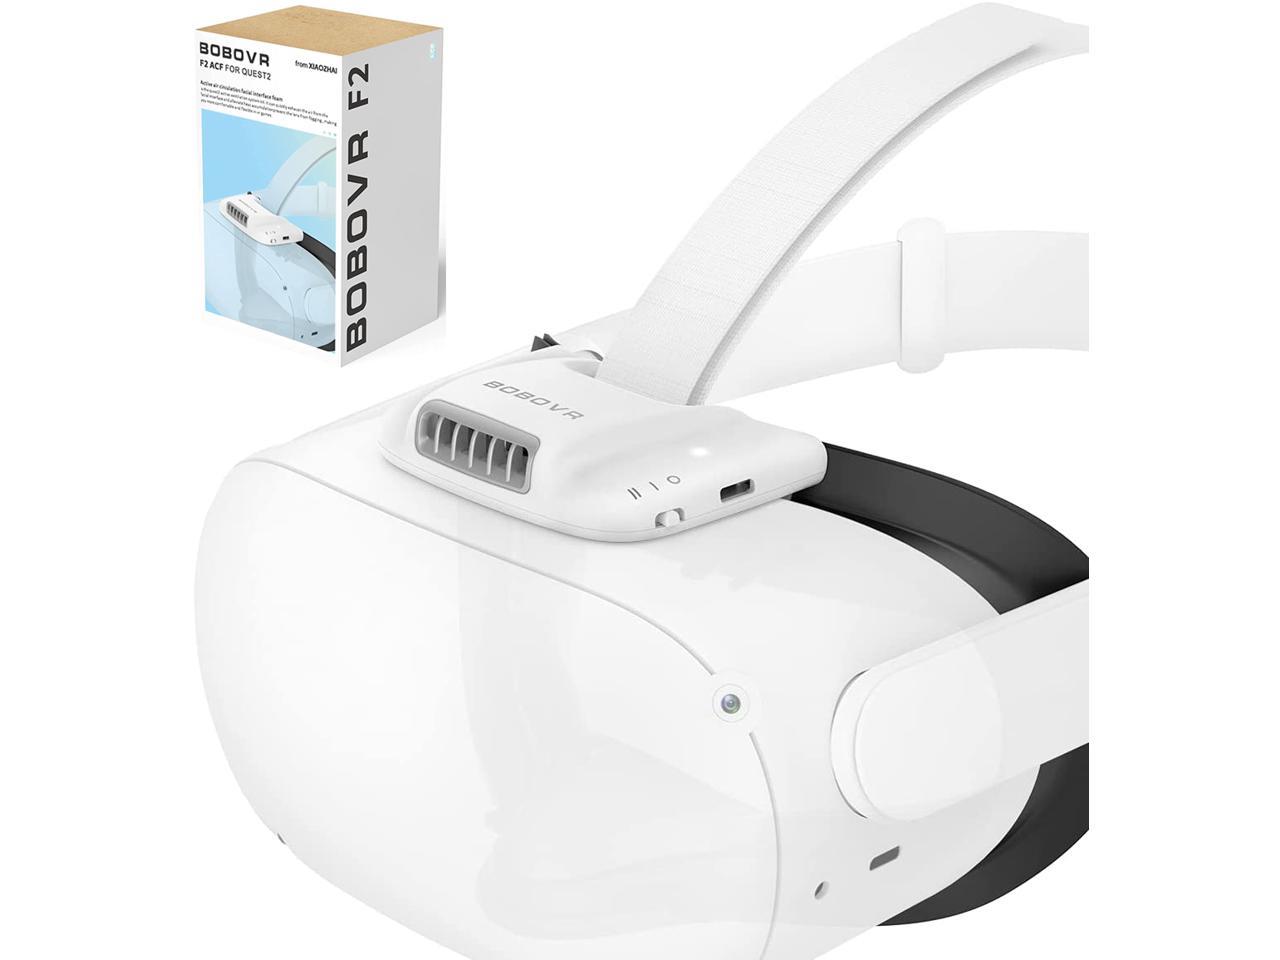 slack svindler hierarki BOBOVR F2- Active Air Circulation Facial Interface for Oculus Quest 2,  Replace Silicone Face Cover Pad, Relieve The Accumulation of Hot Air and  Lens Fogging - Newegg.com